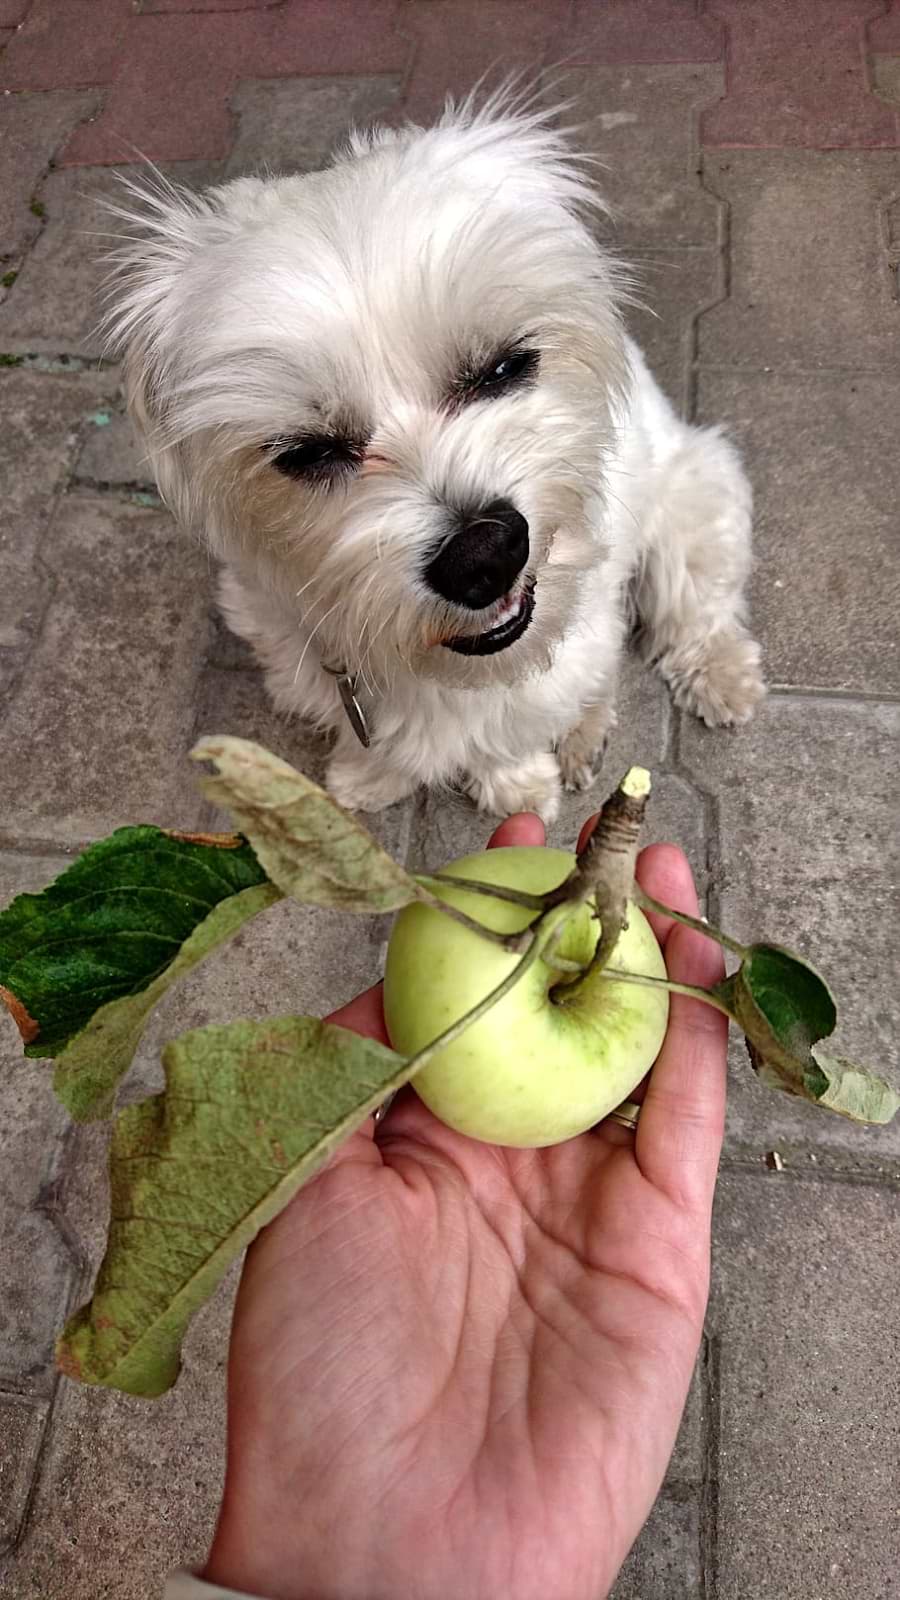 Can dogs eat pears